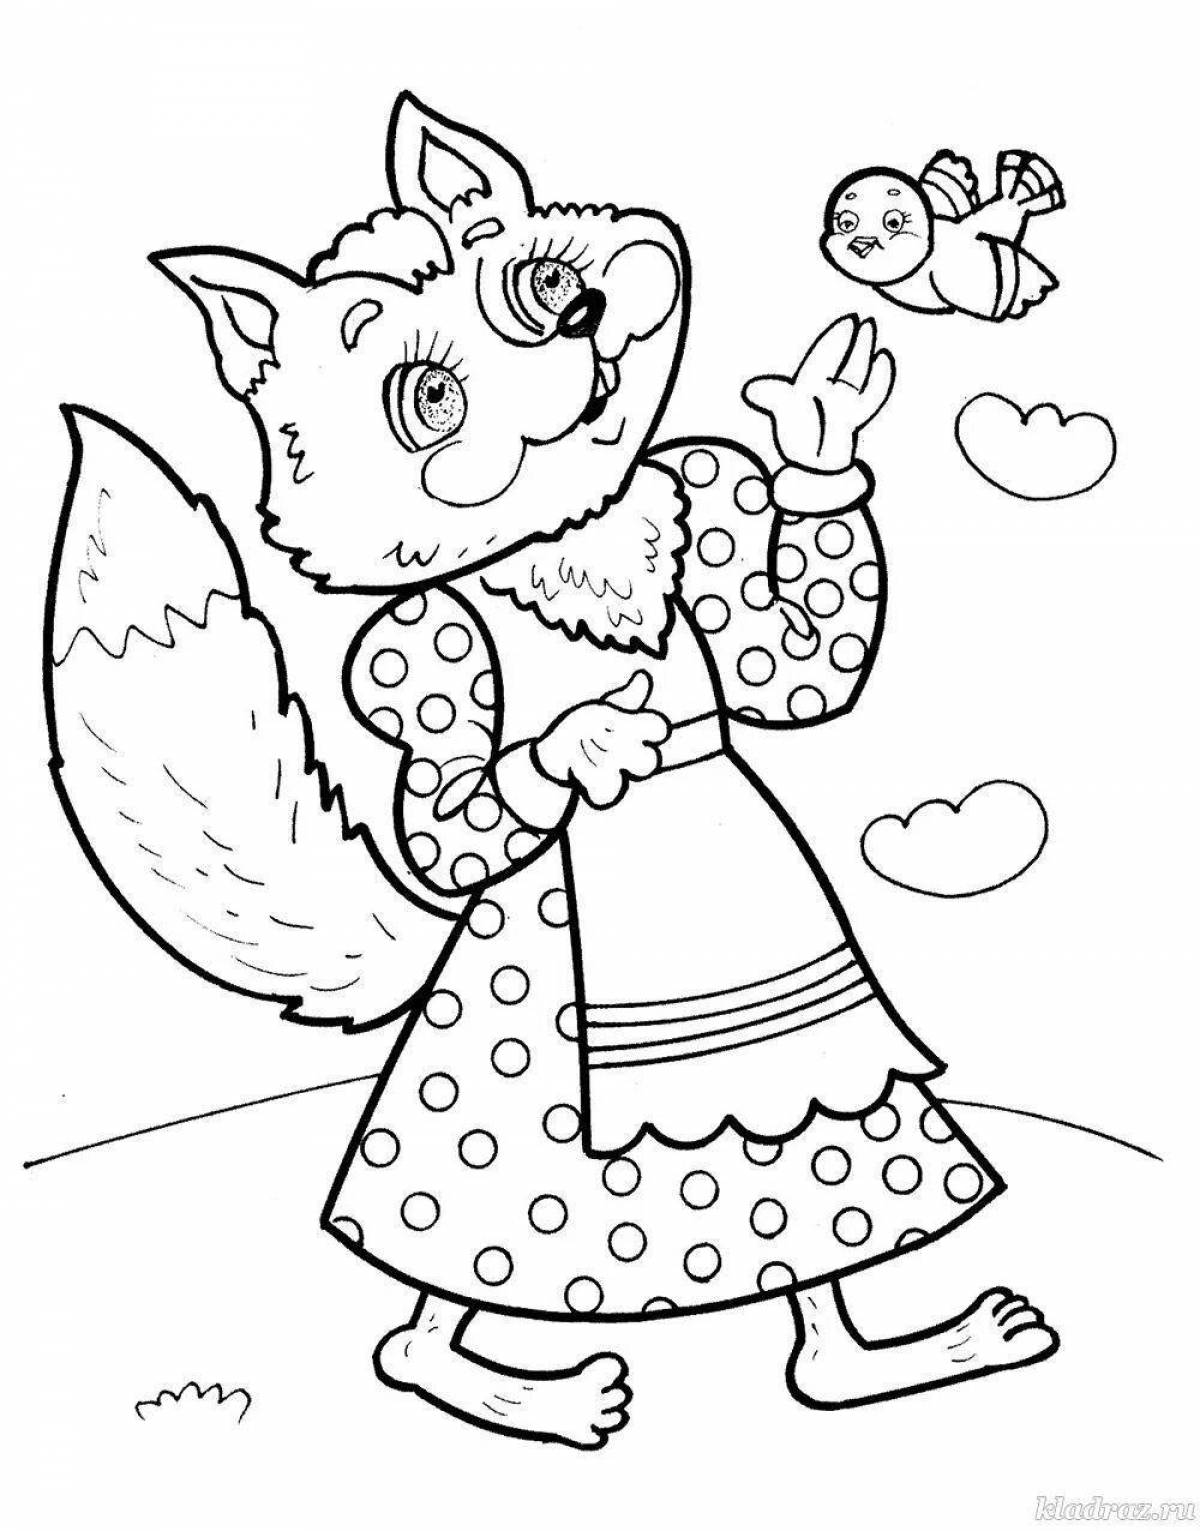 Live fox coloring book for 3-4 year olds